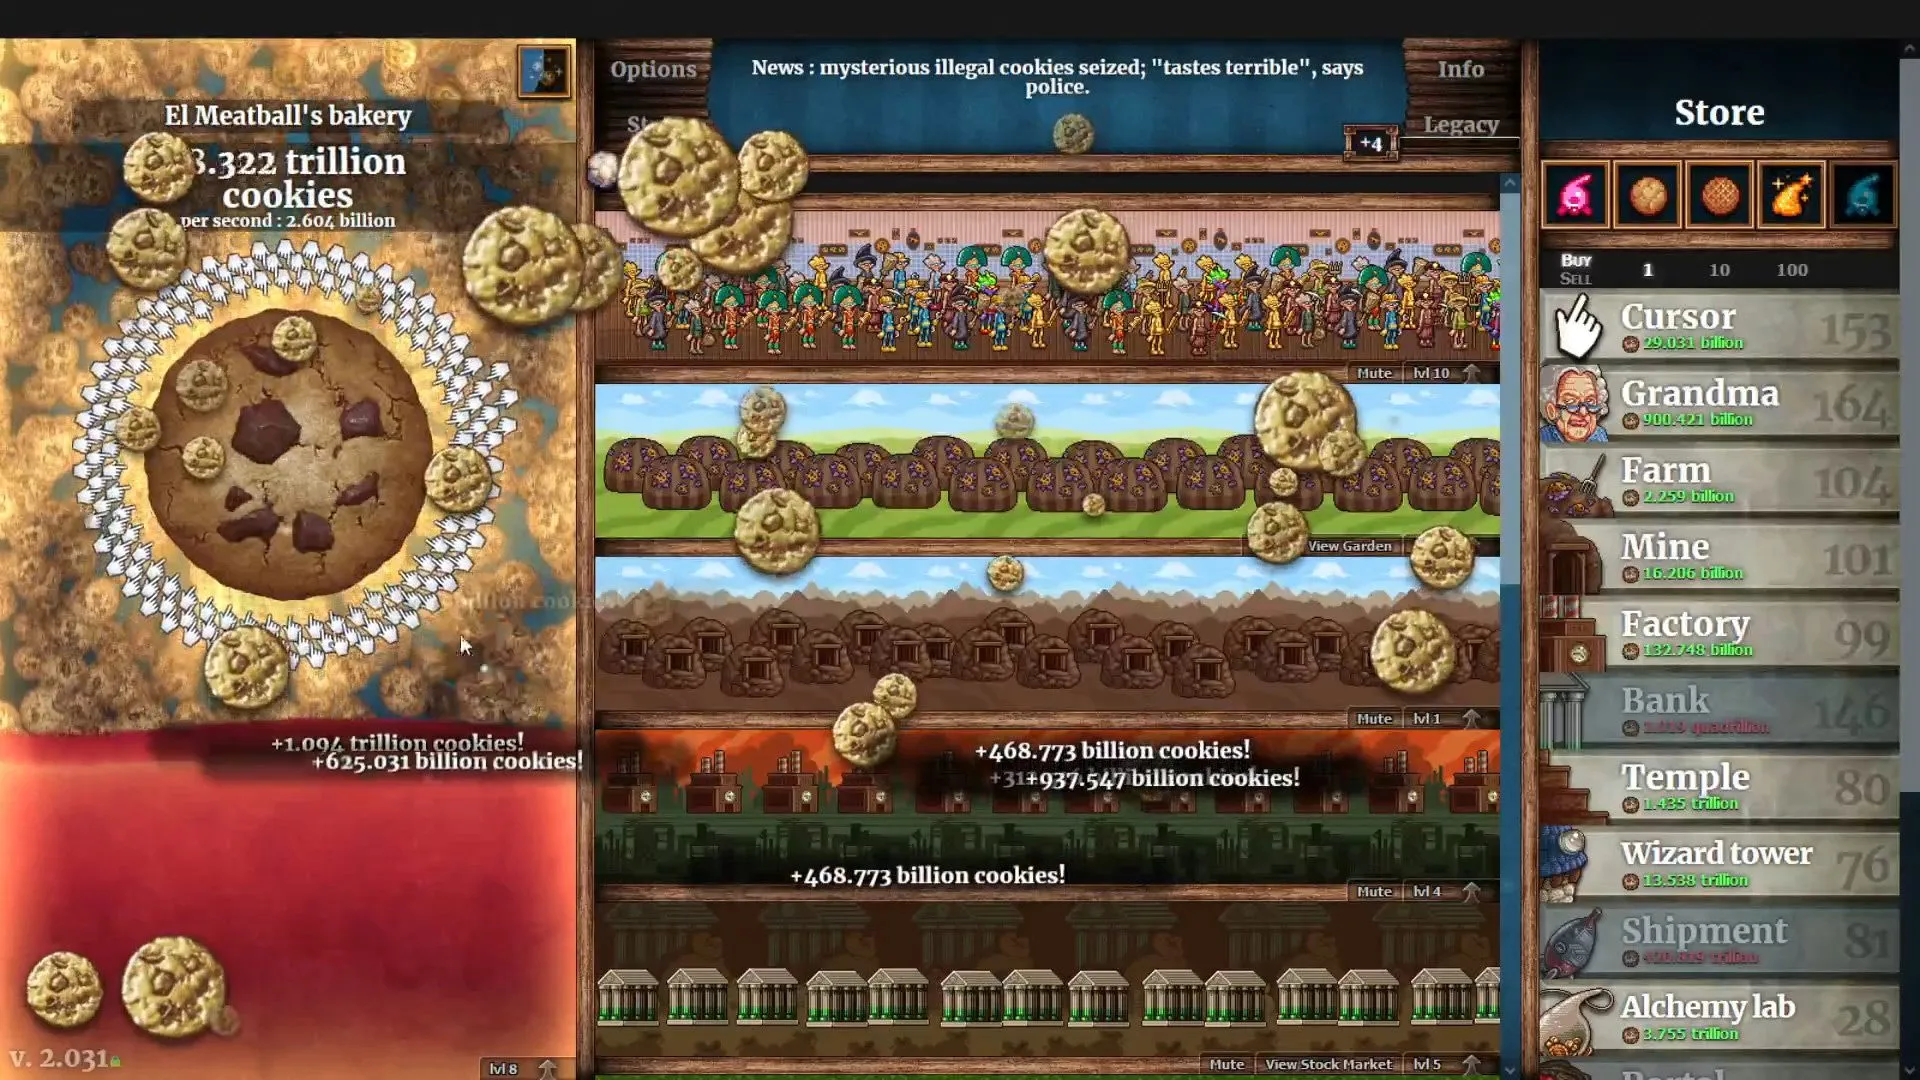 Why can't I play the minigames in Cookie Clicker?